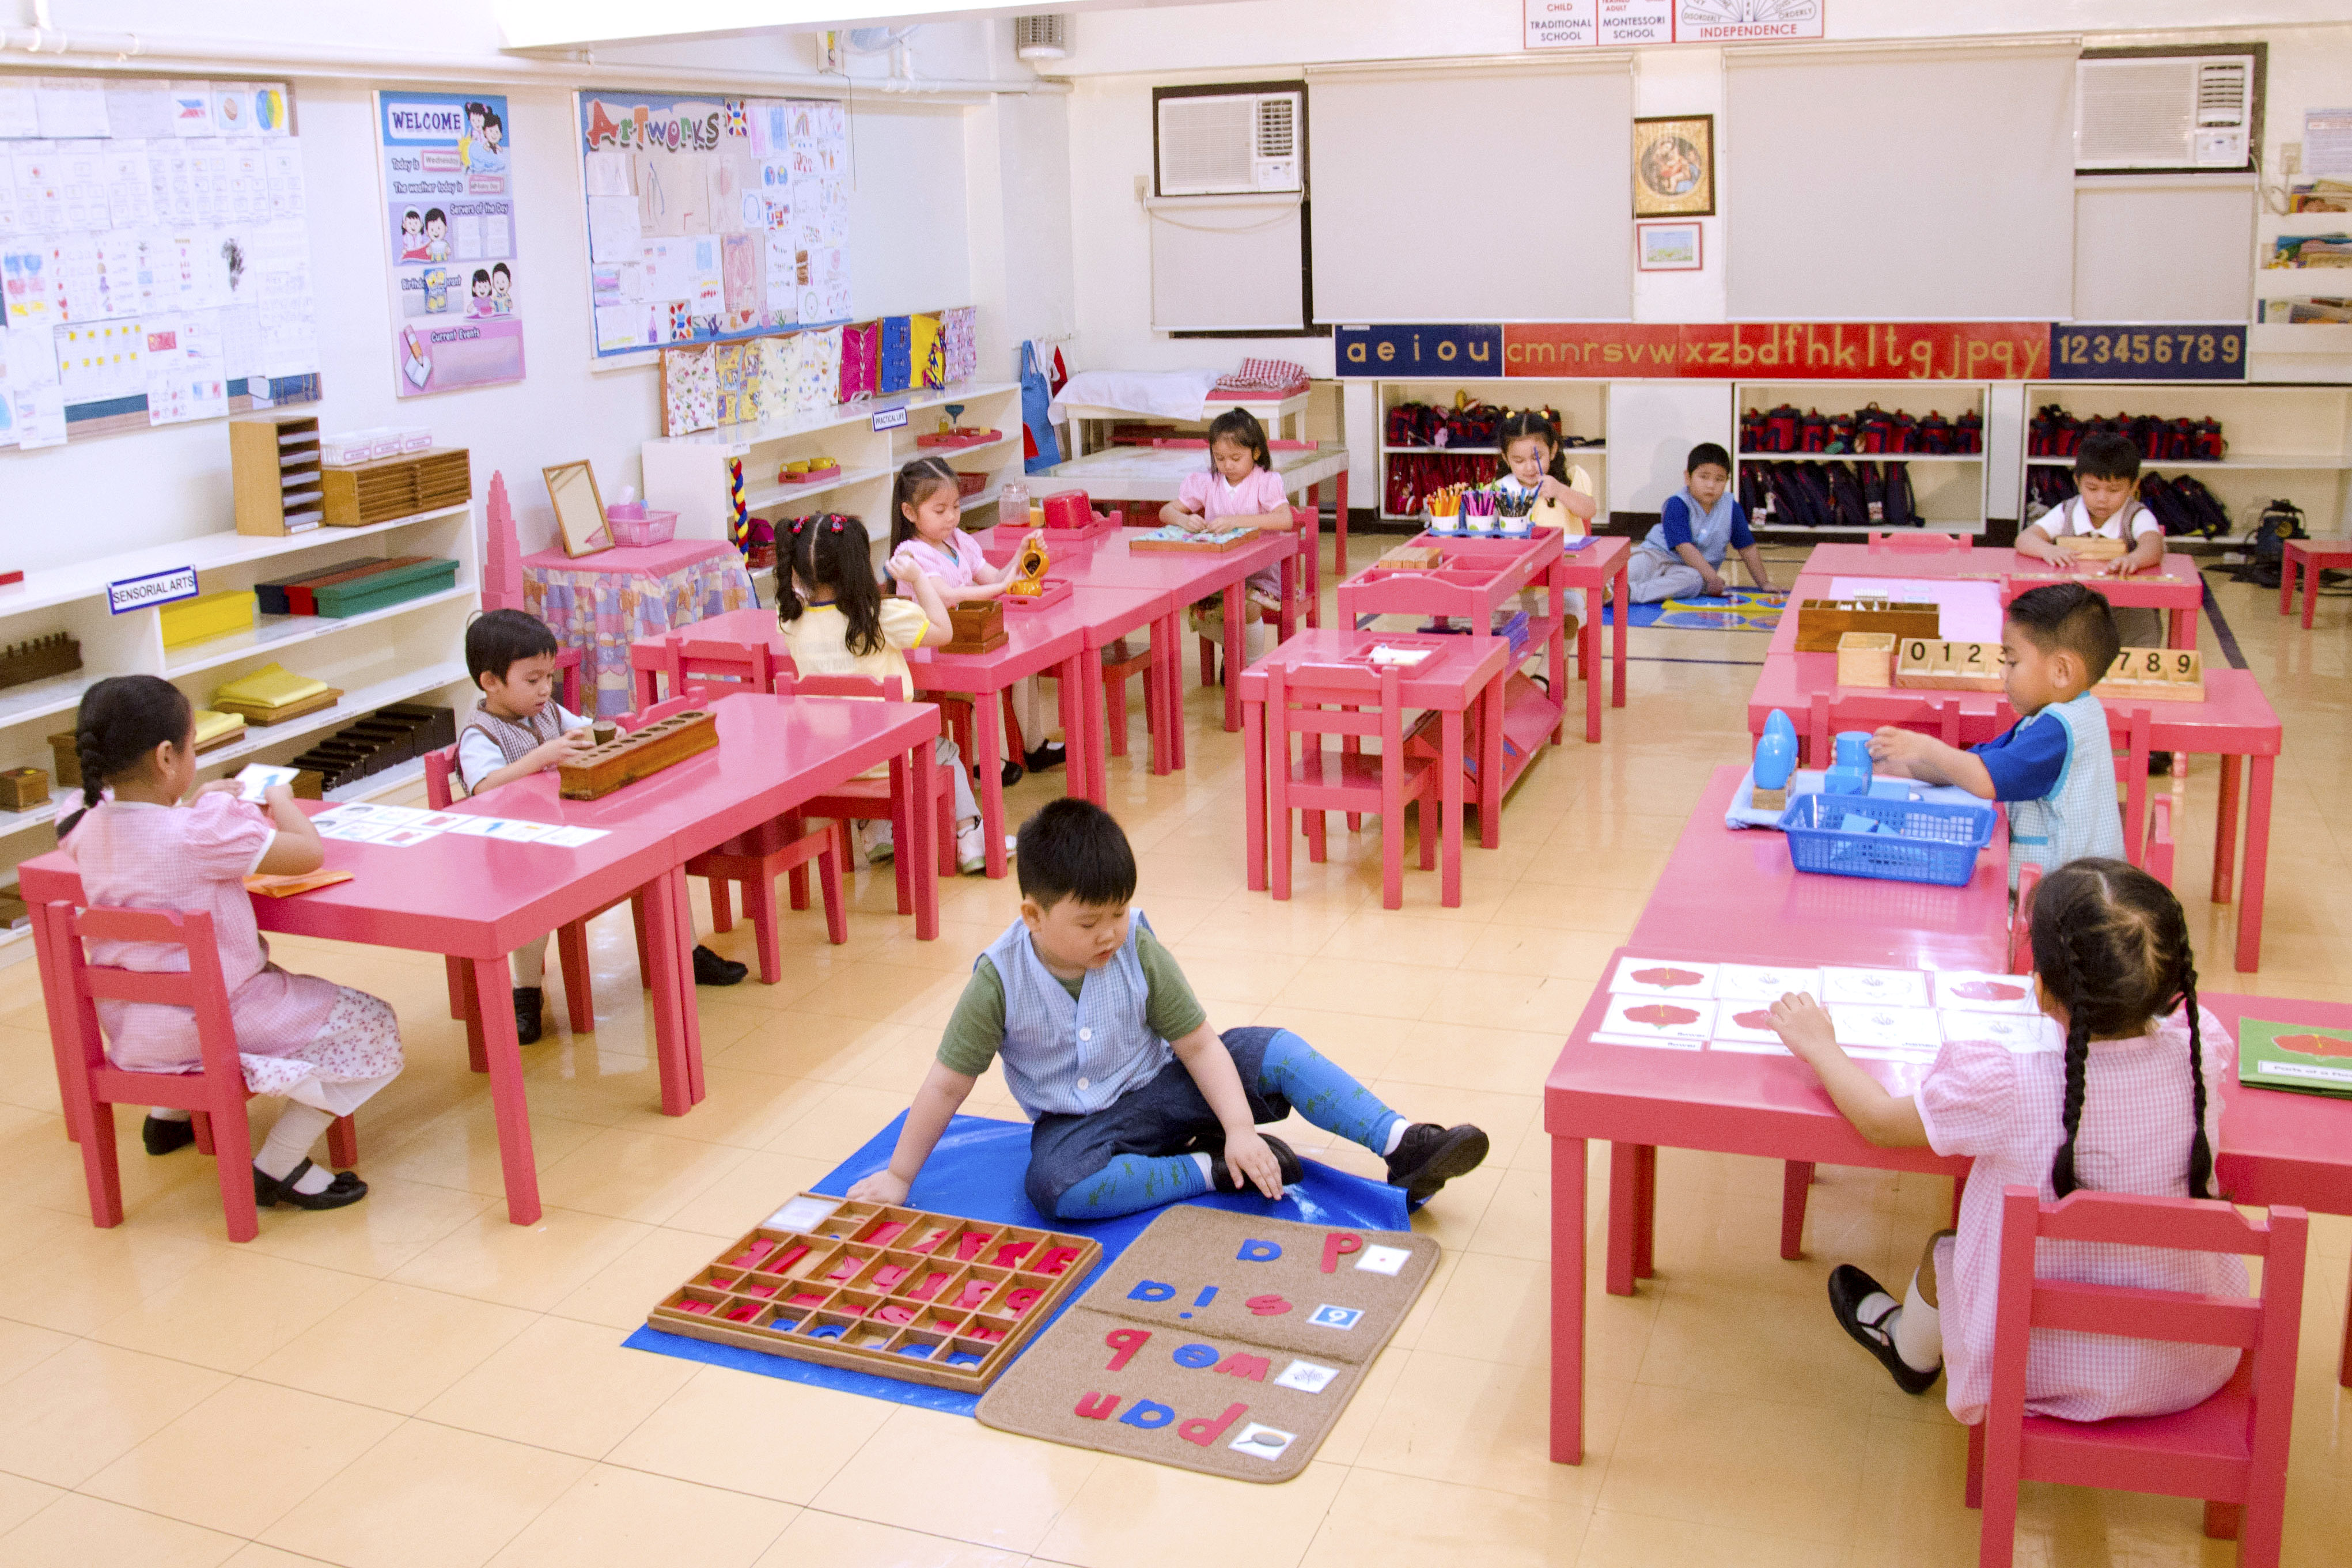 What makes the OBMC Casa Program different from other preschools